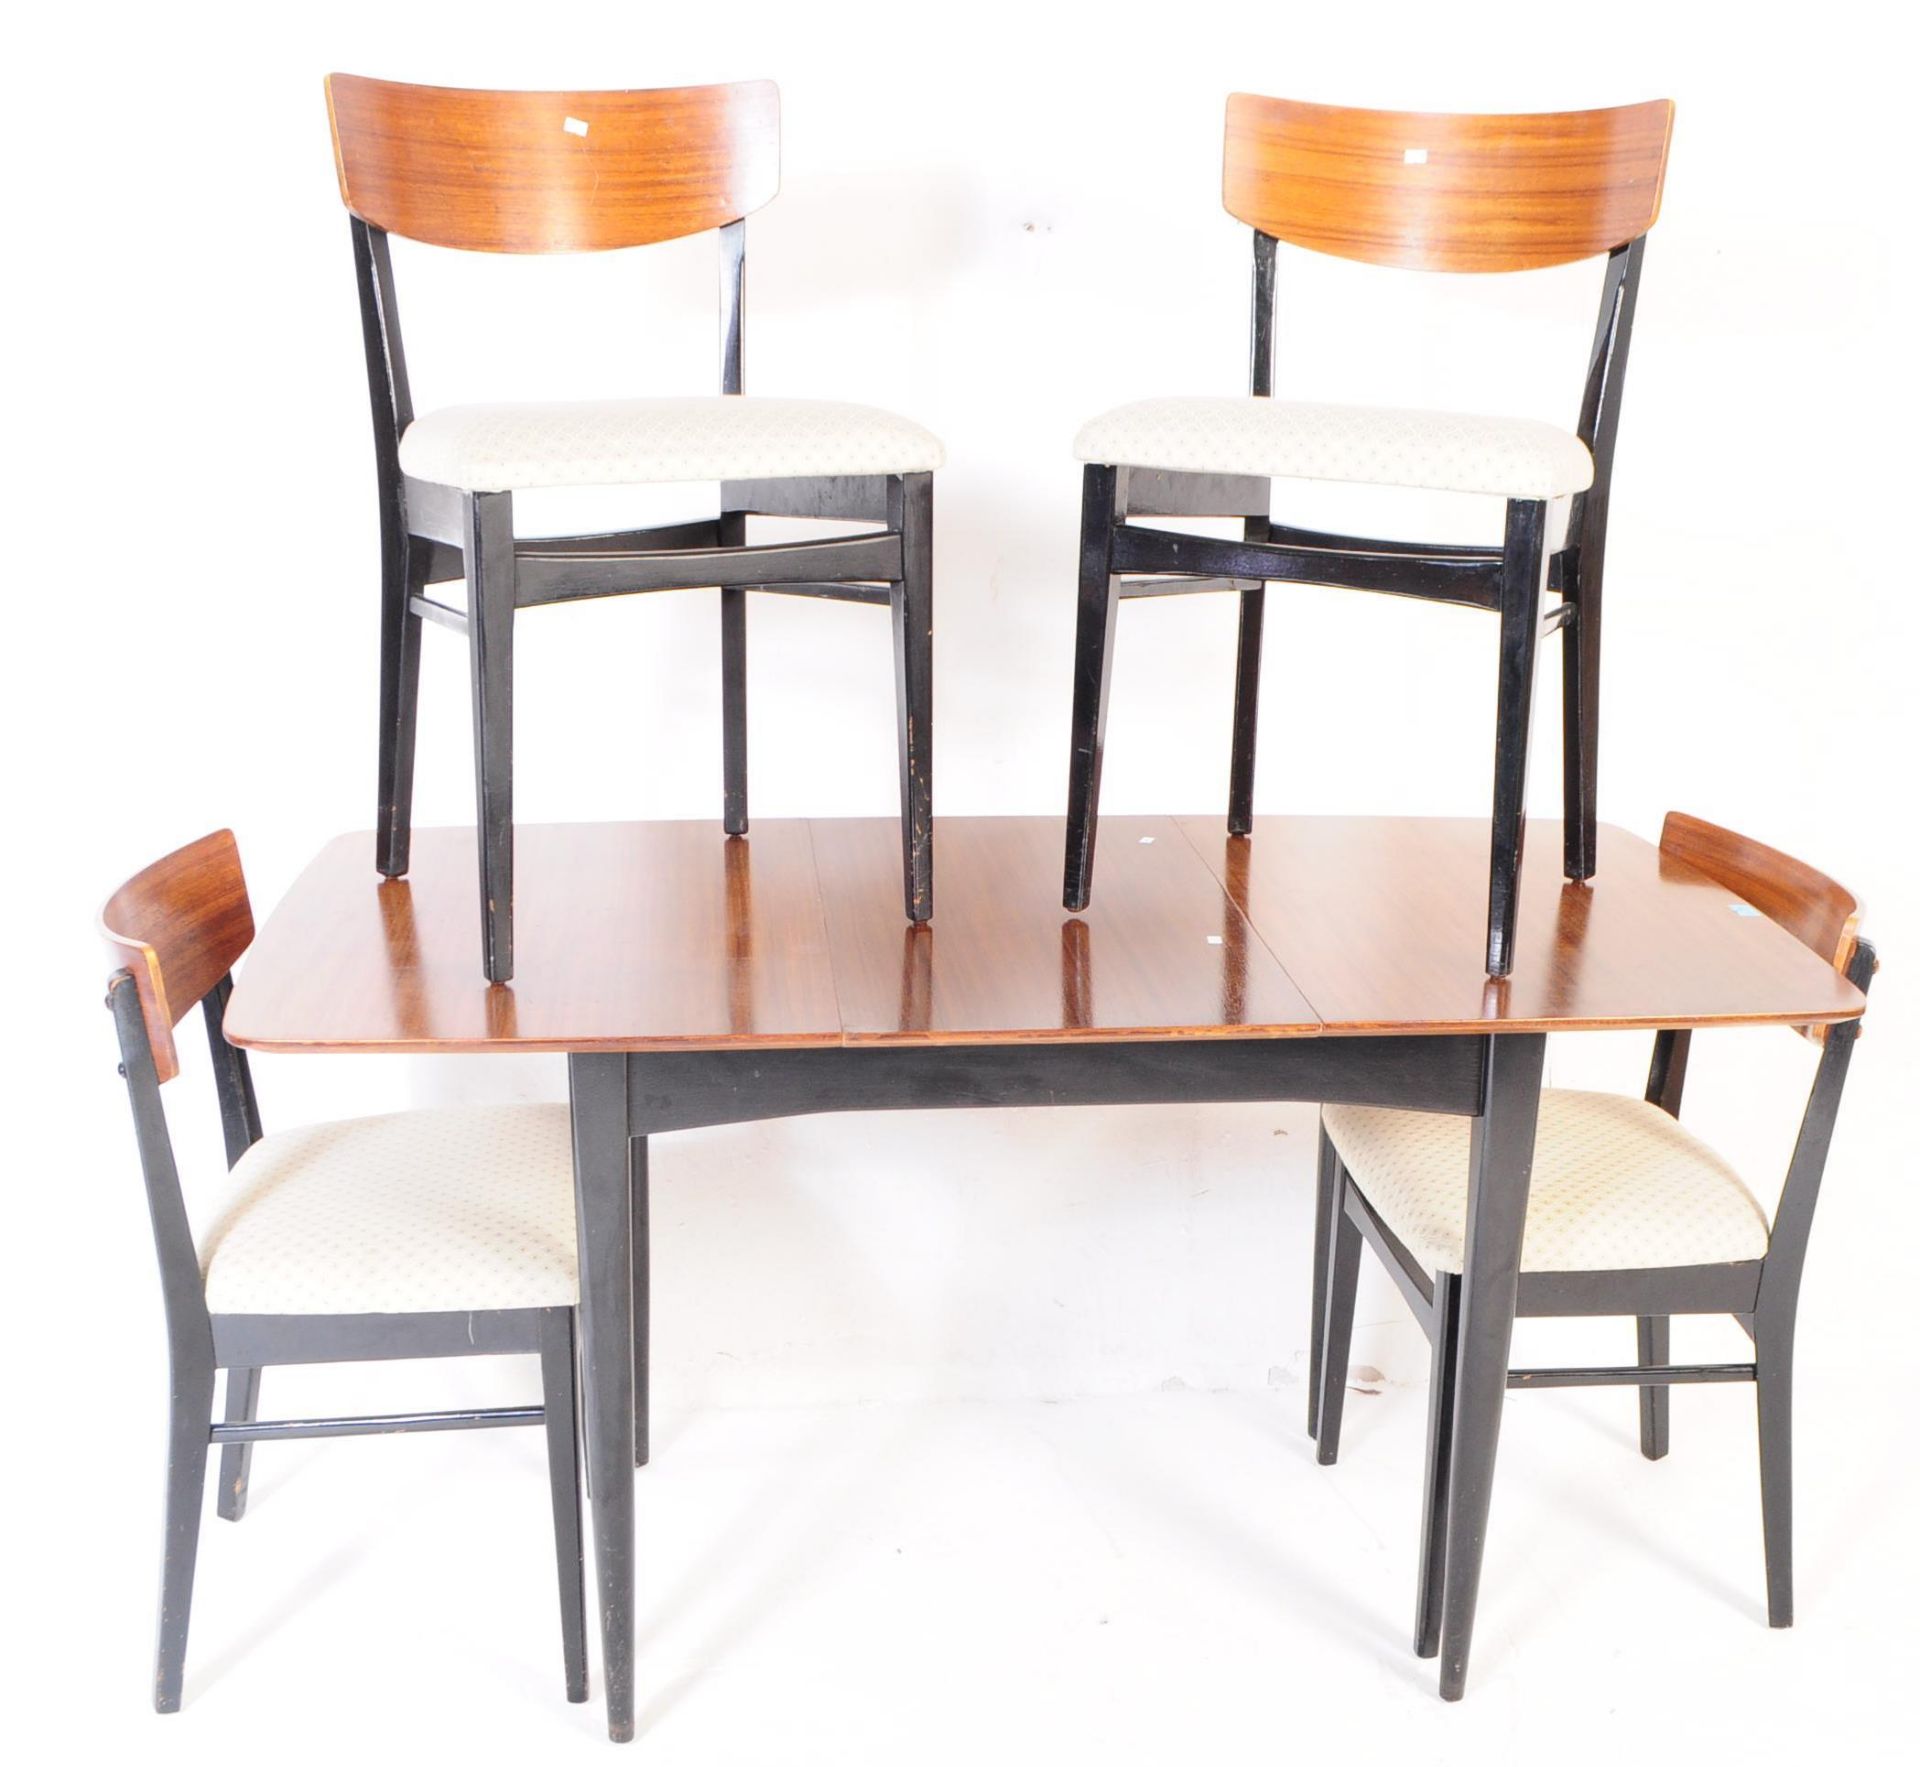 WRIGHTON - MID CENTURY DINING TABLE AND CHAIRS - Image 2 of 6